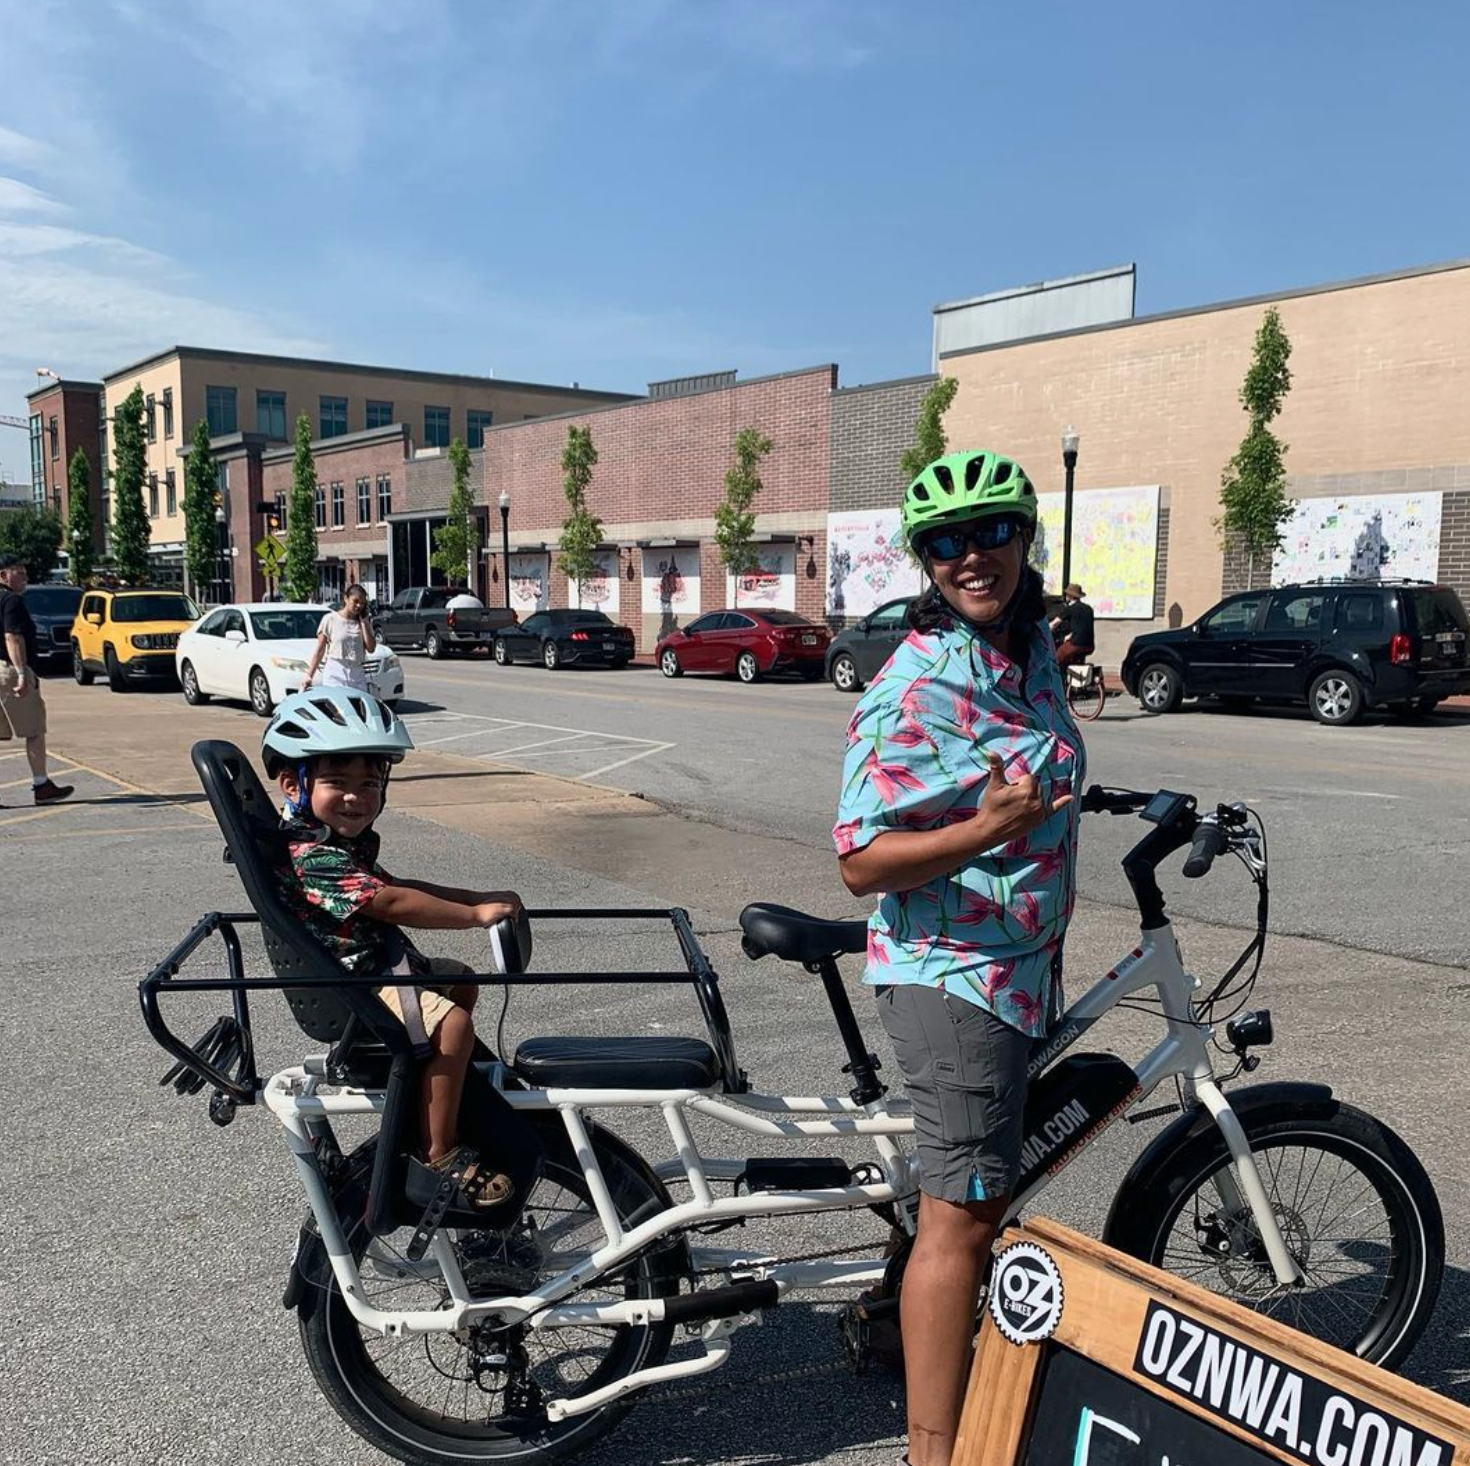 You are currently viewing Ebike Rentals Near Me | OZ EBikes